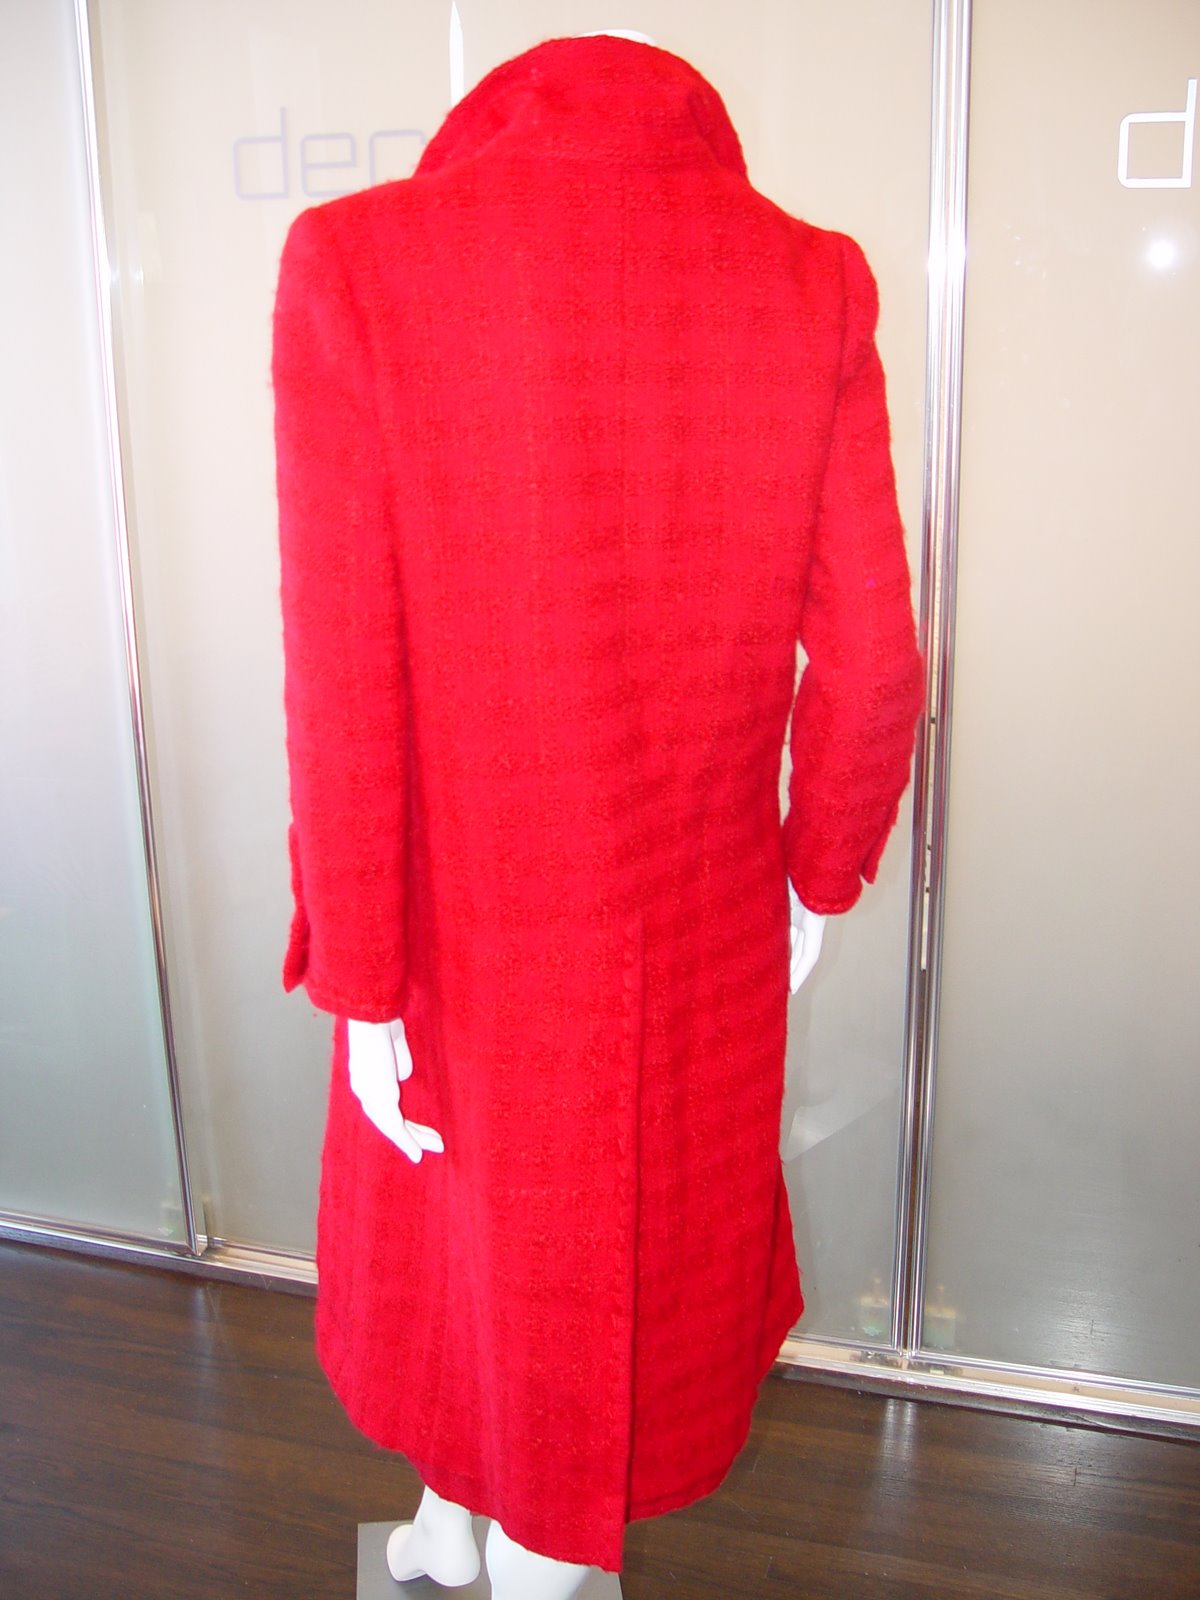 [CHANEL+CREATIONS+70S+PRE+KARL+LAGERFELD+RED+BOUCLE+COAT+SUIT+WITH+MATCHING+SKIRT.JPG.JPG]